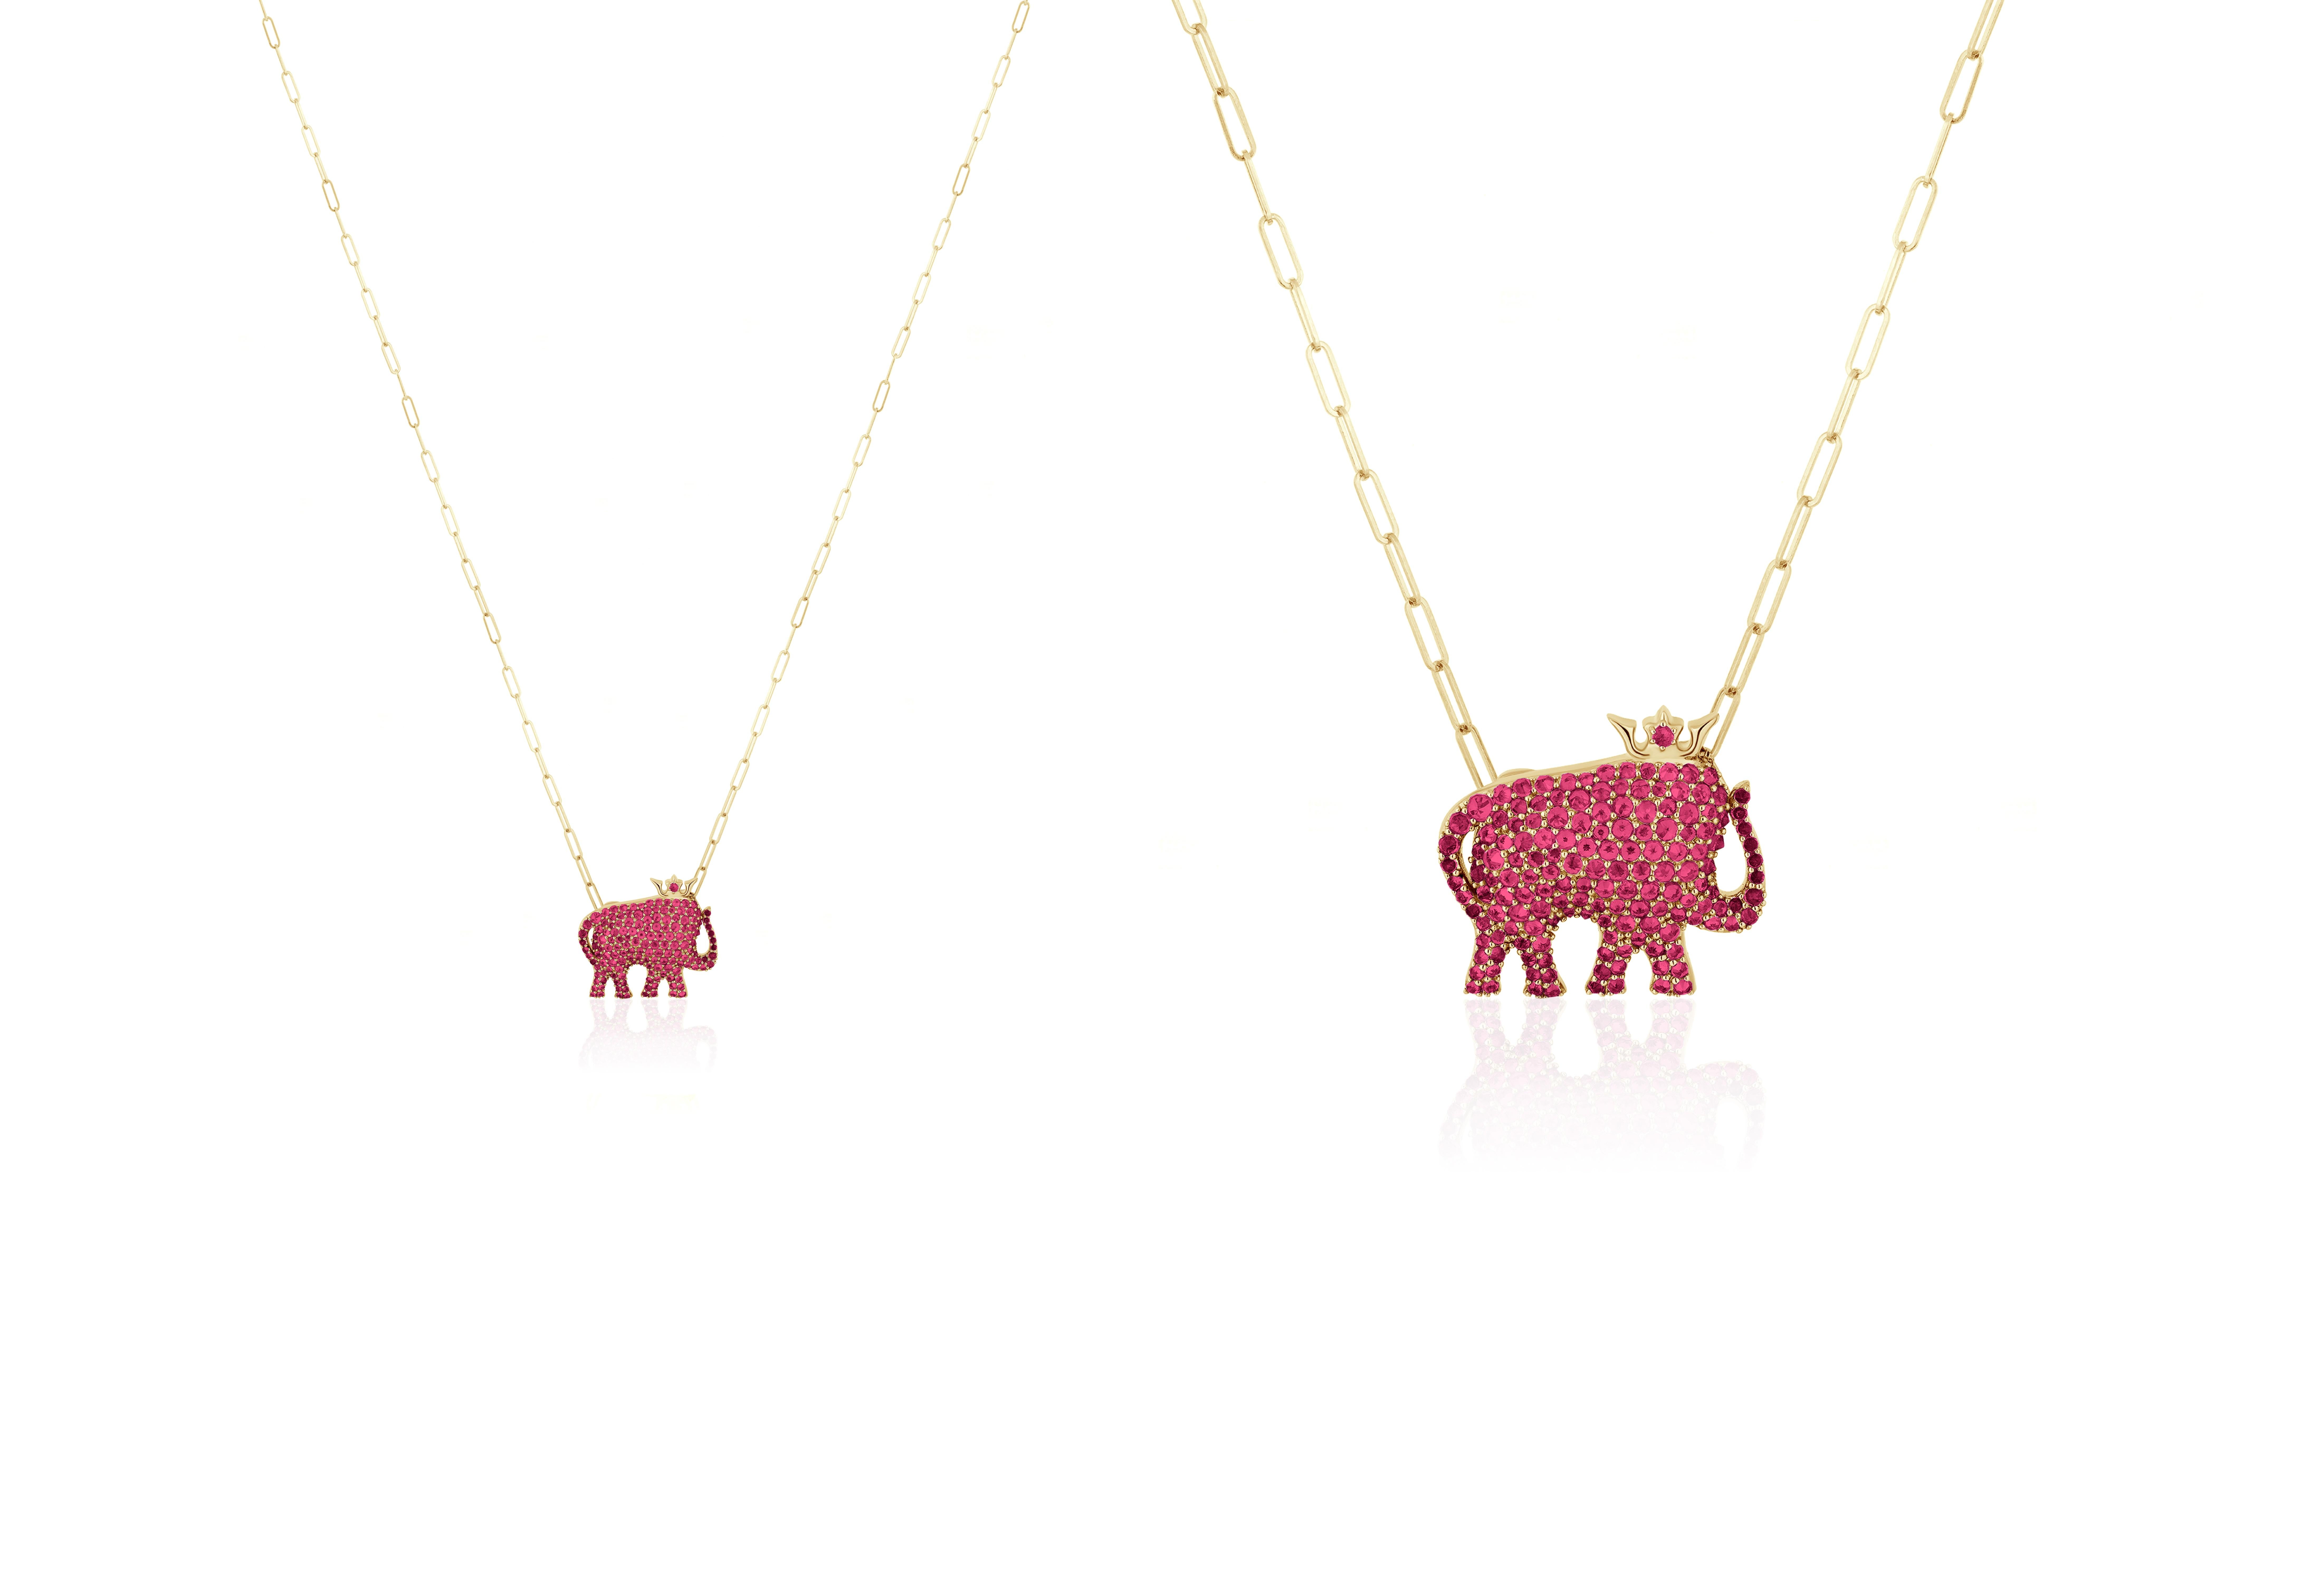 The Small Ruby Elephant Shape Pendant in 18K Yellow Gold is a unique and exquisite piece from the 'Limited Edition' collection. The pendant features a charming elephant shape, crafted in 18K yellow gold and adorned with small, vibrant ruby